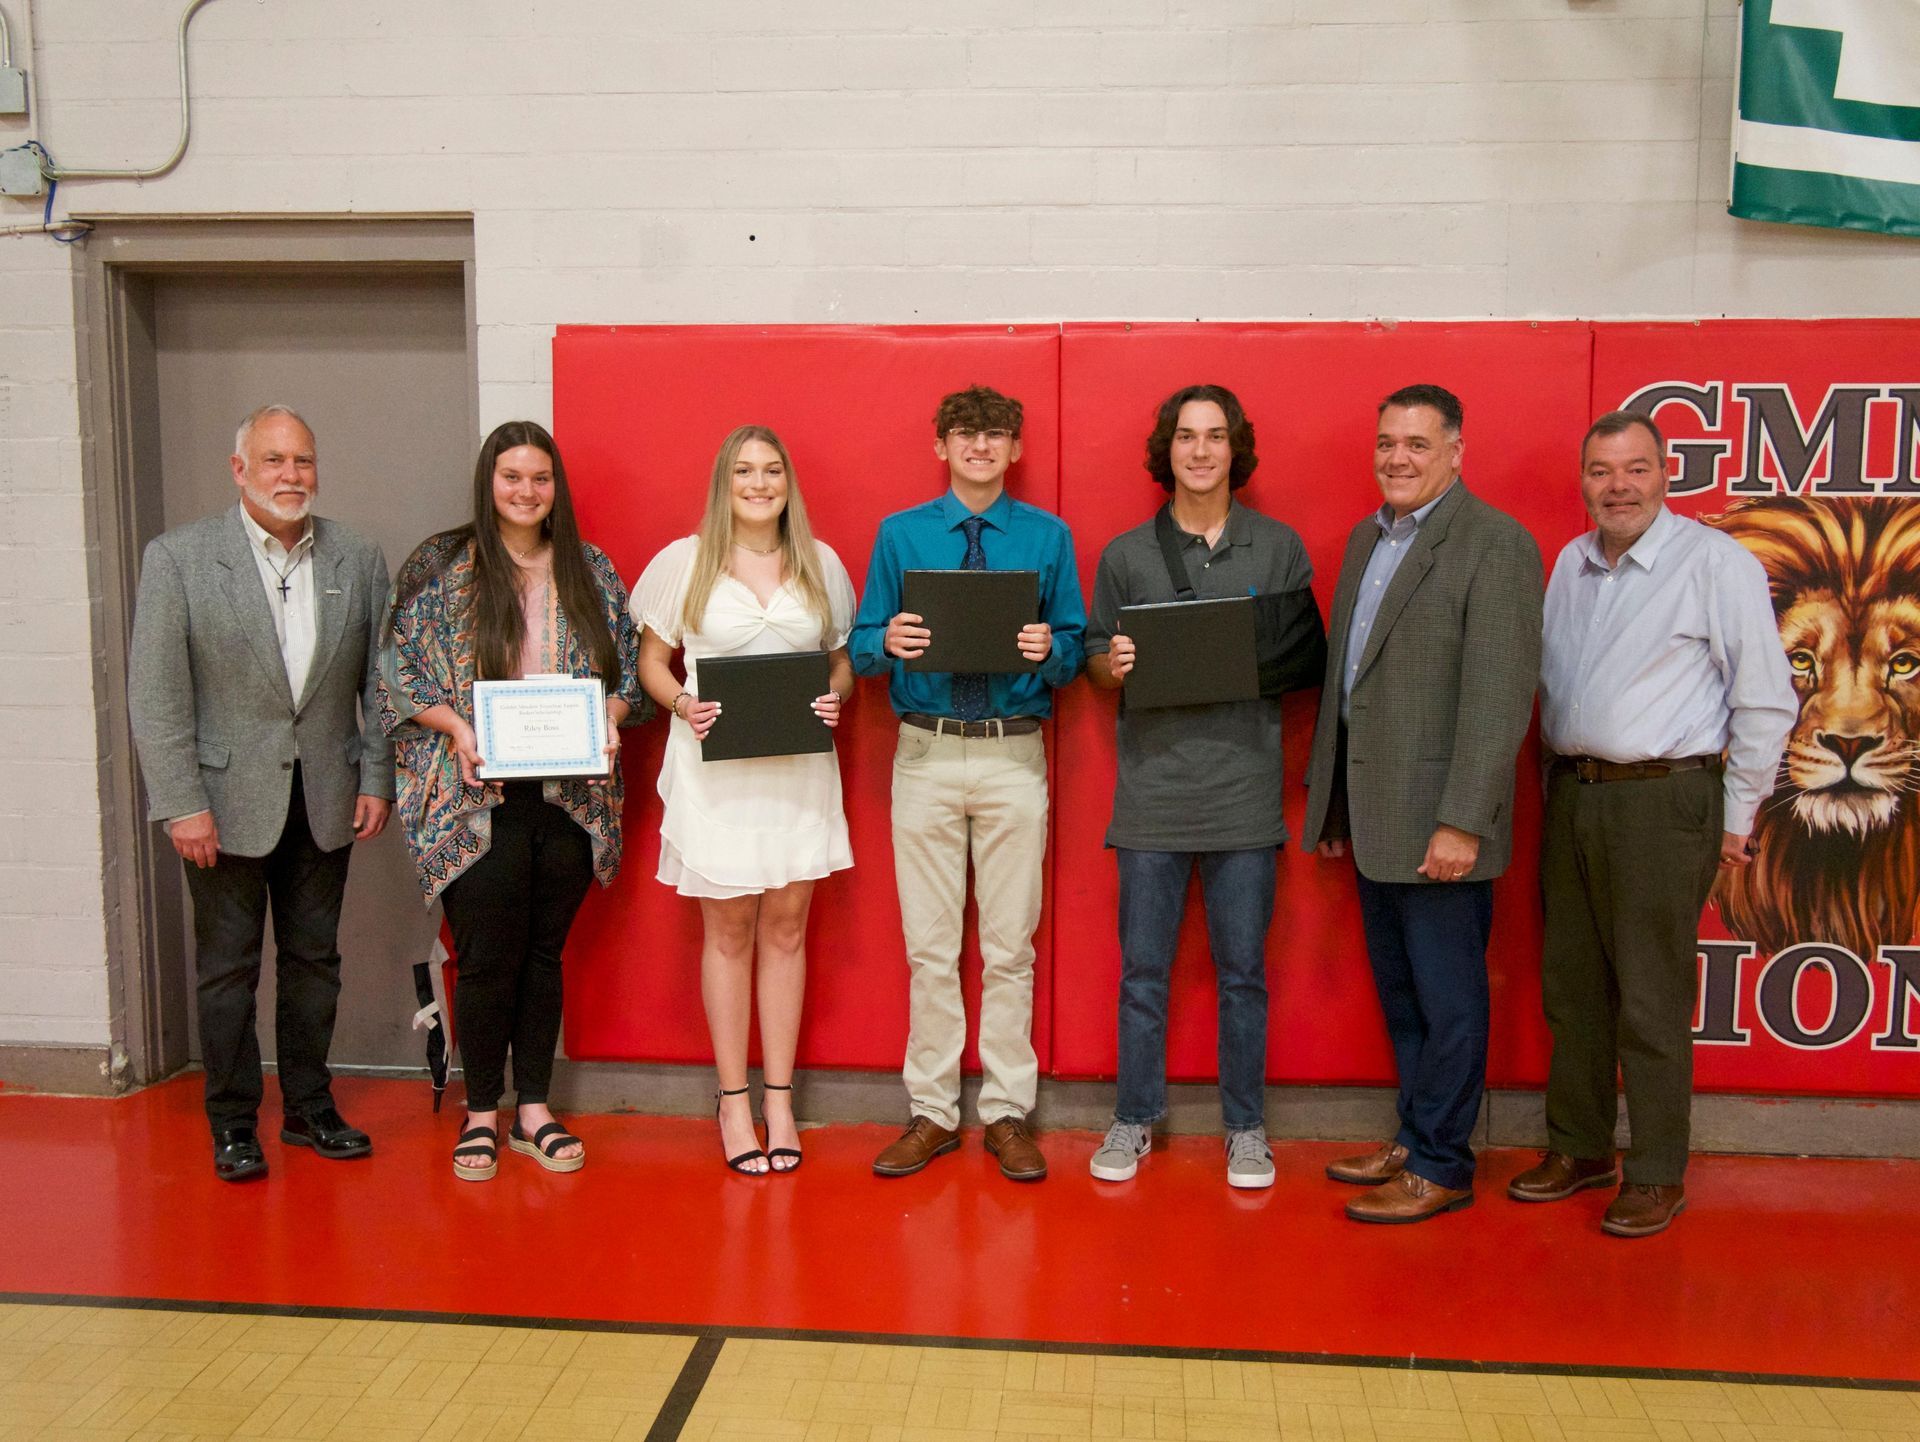 A group of people standing next to each other in a gym holding certificates.